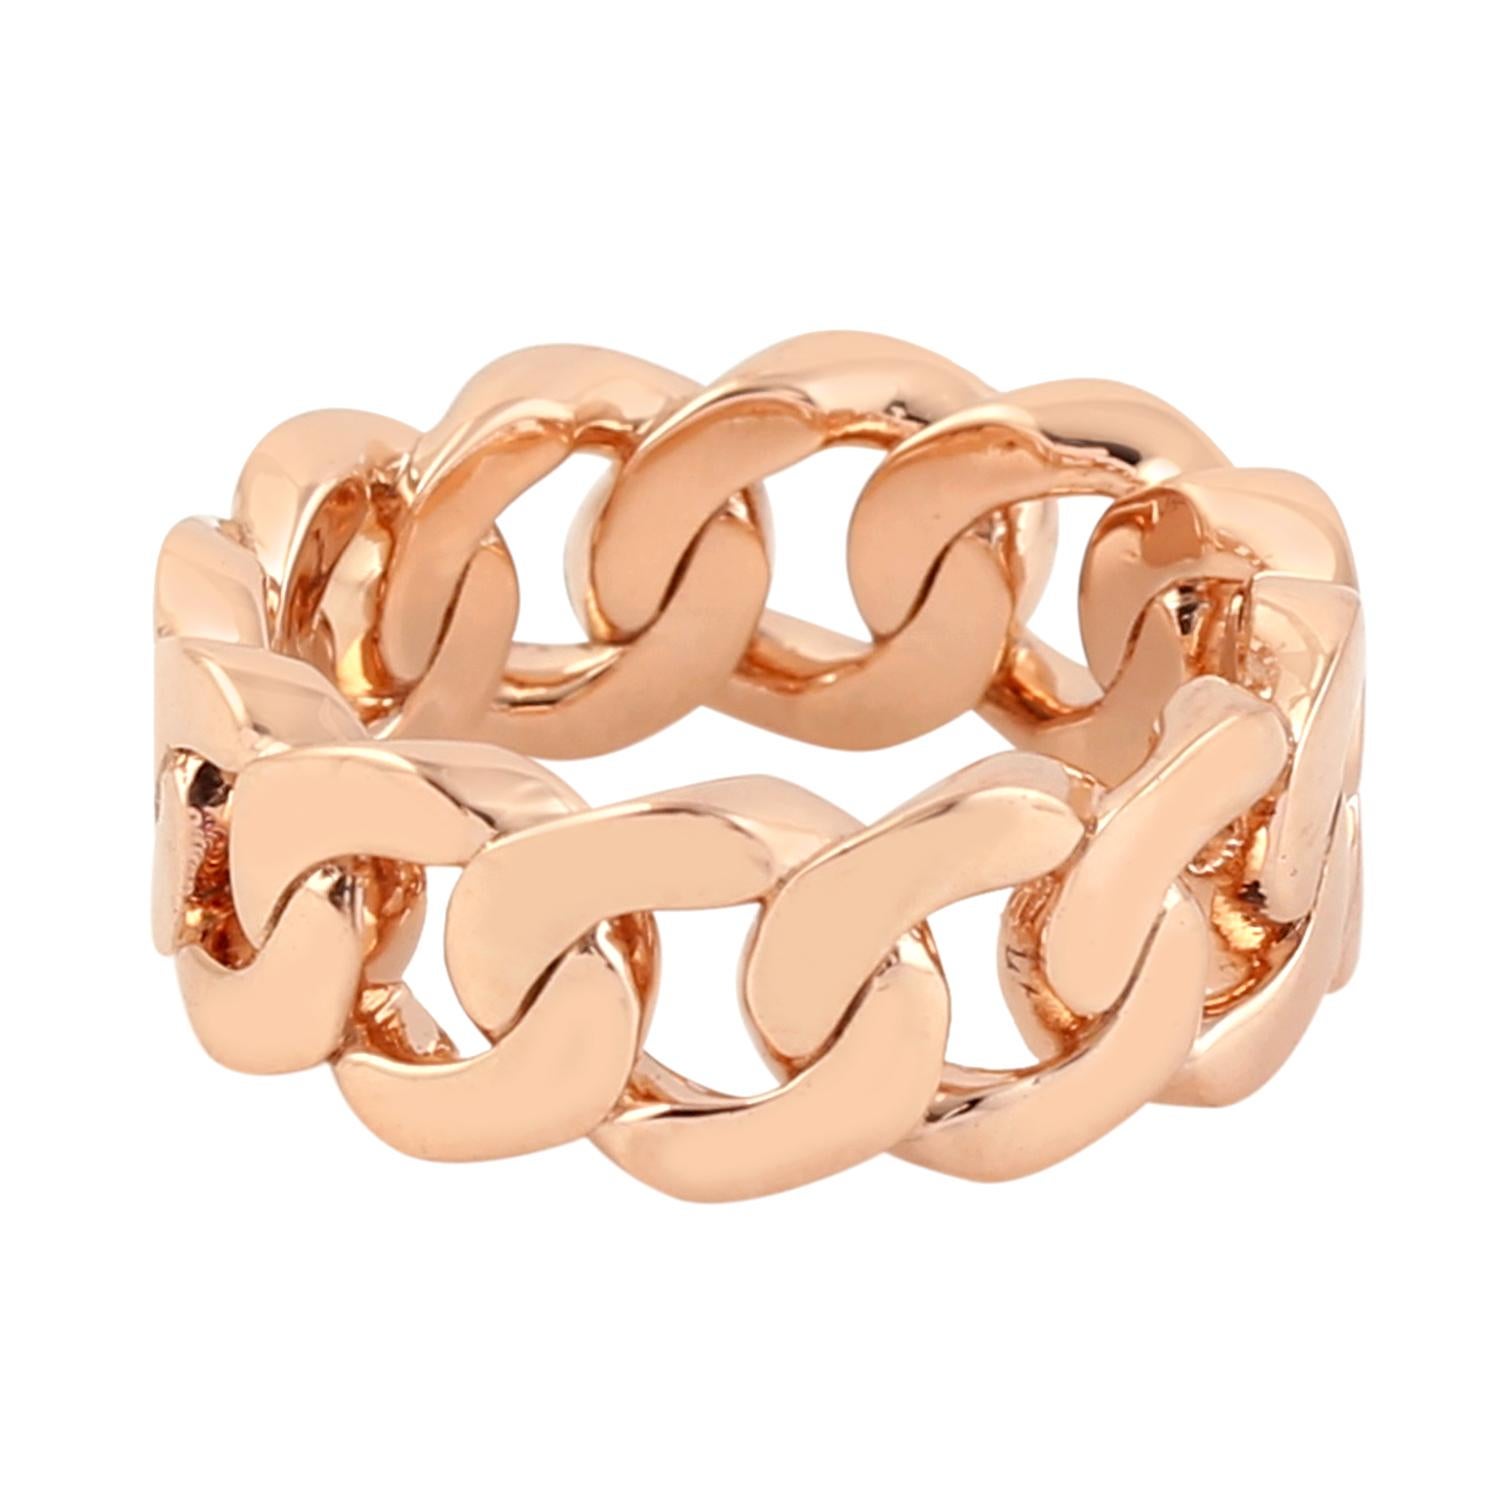 Mixed Cut Cuban Chain Knotted Design Band Ring WIth Diamonds In 18k Gold For Sale